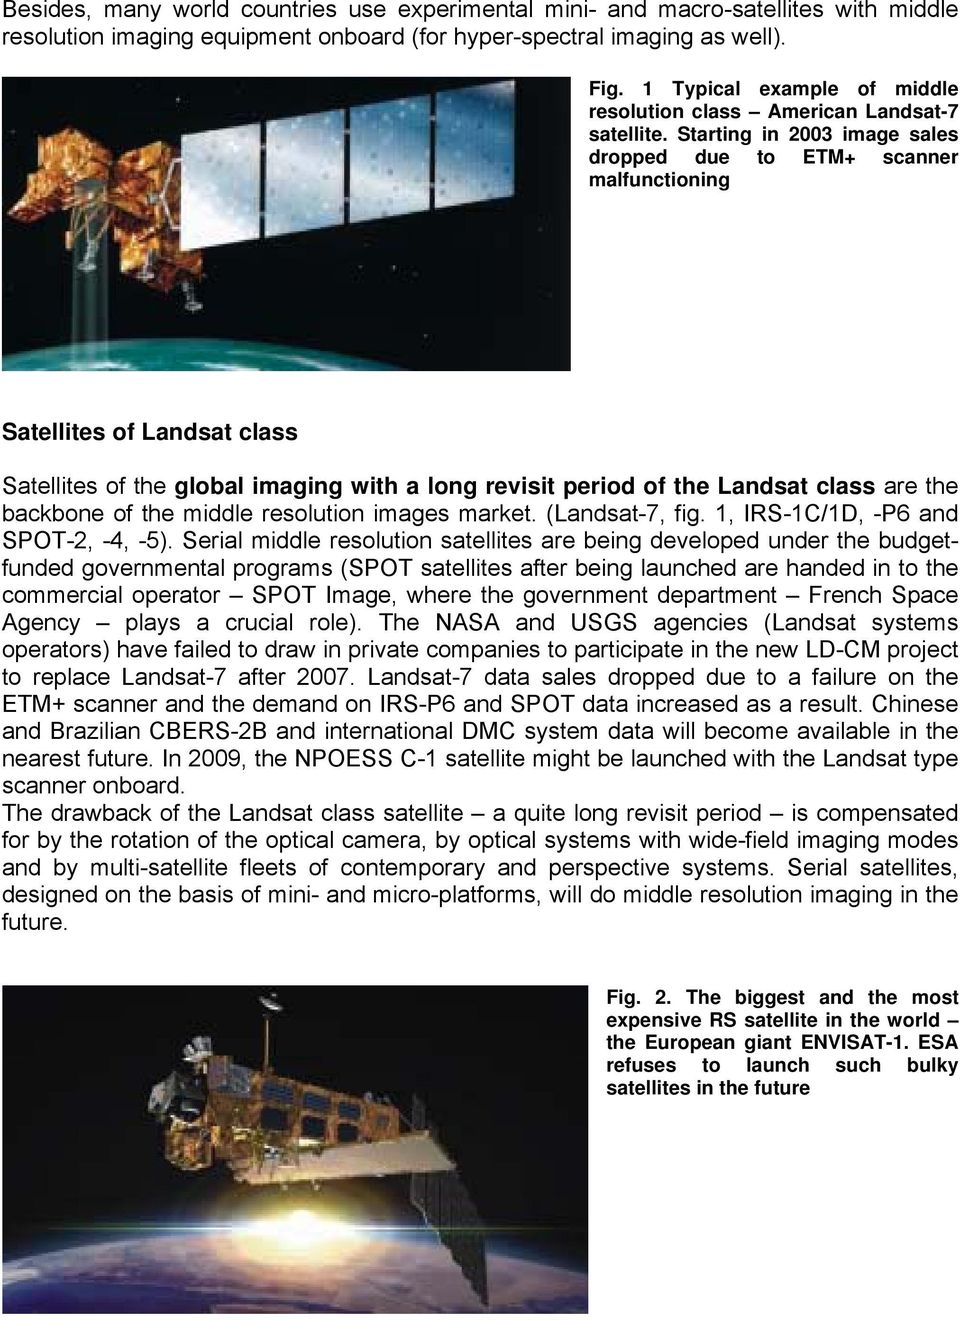 Starting in 2003 image sales dropped due to ETM+ scanner malfunctioning Satellites of Landsat class Satellites of the global imaging with a long revisit period of the Landsat class are the backbone